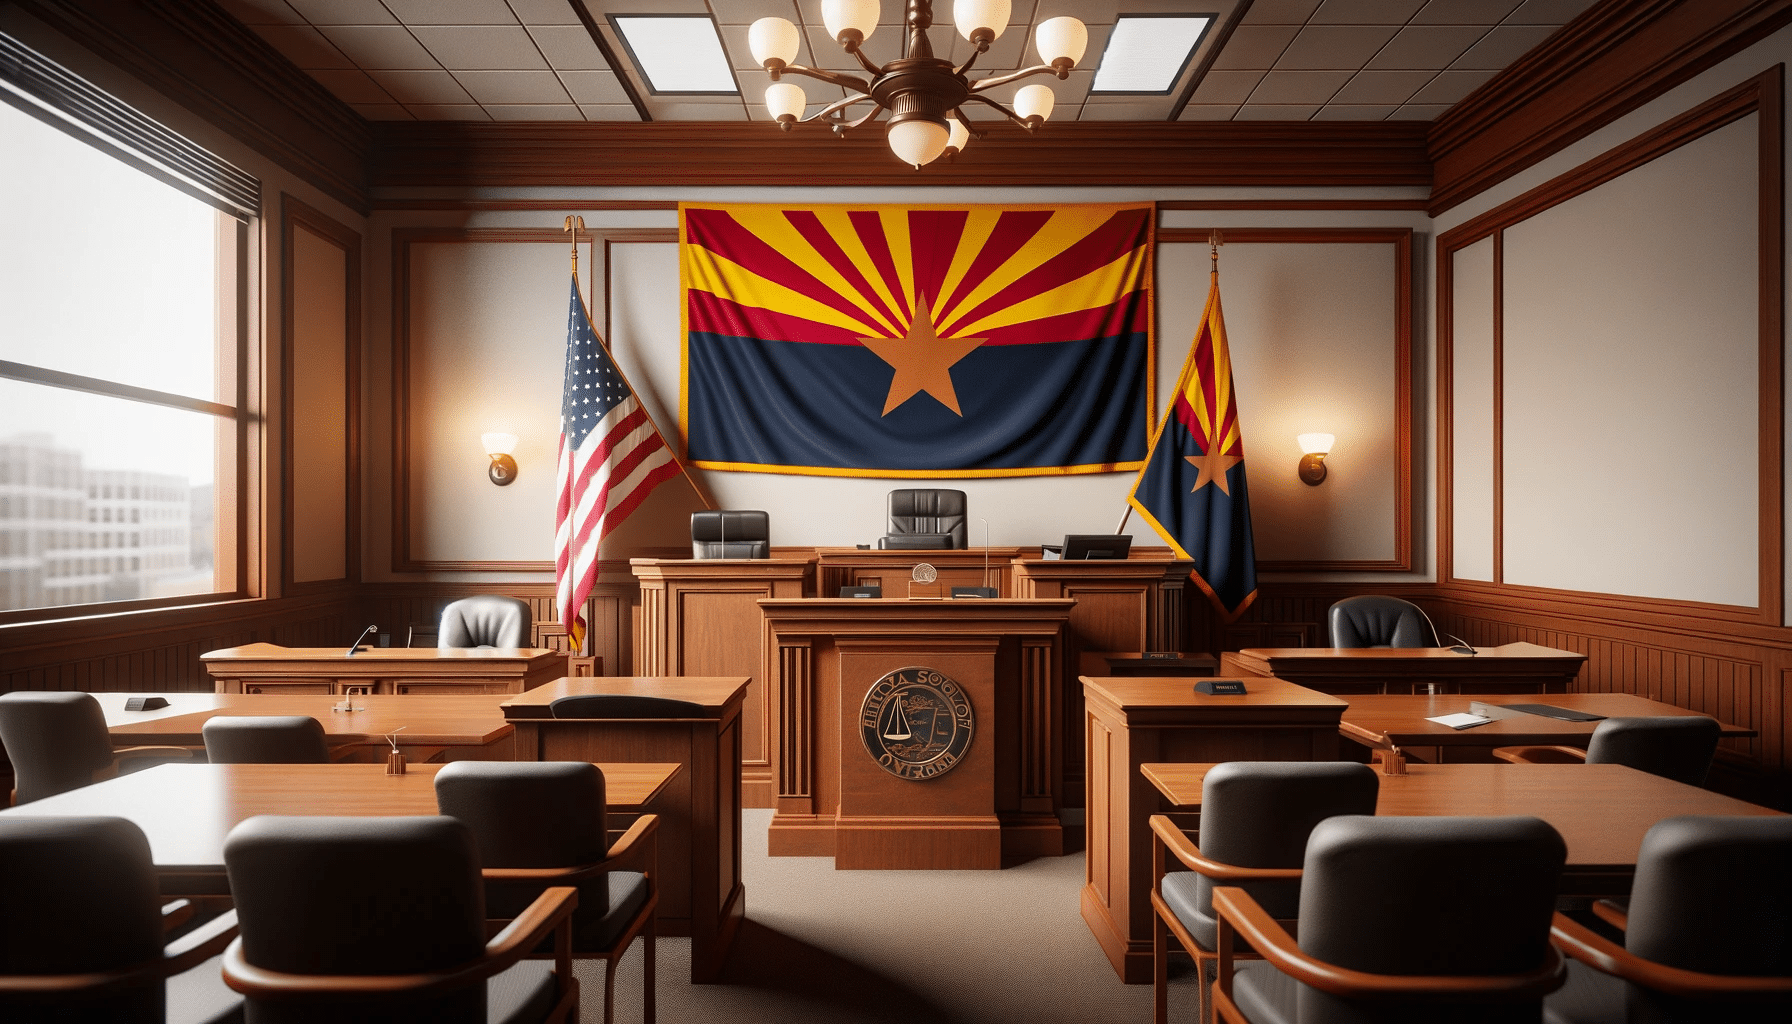 Interior view of a traditional Arizona courtroom with state and national flags.